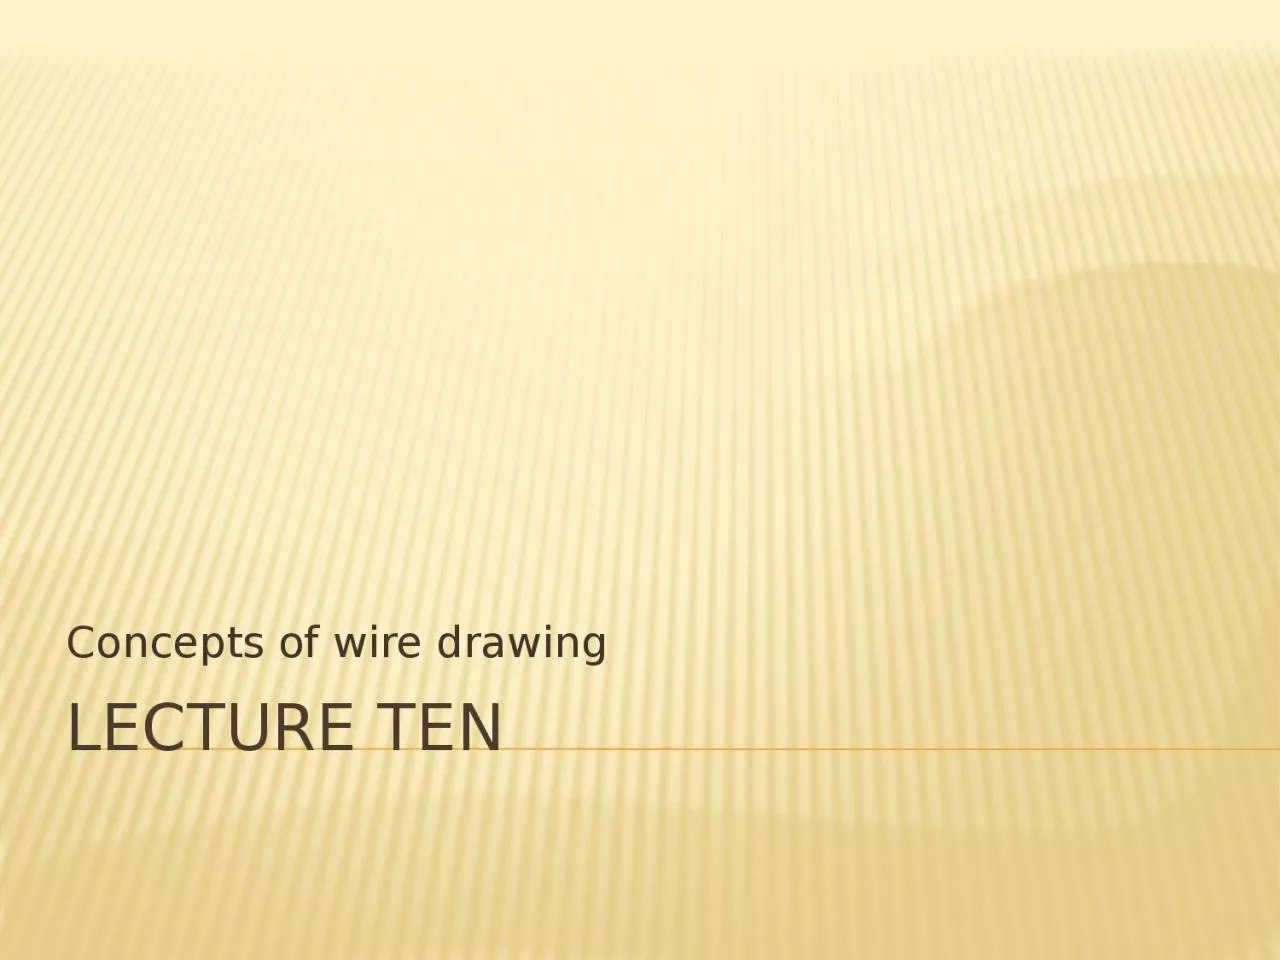 Lecture ten Concepts of wire drawing